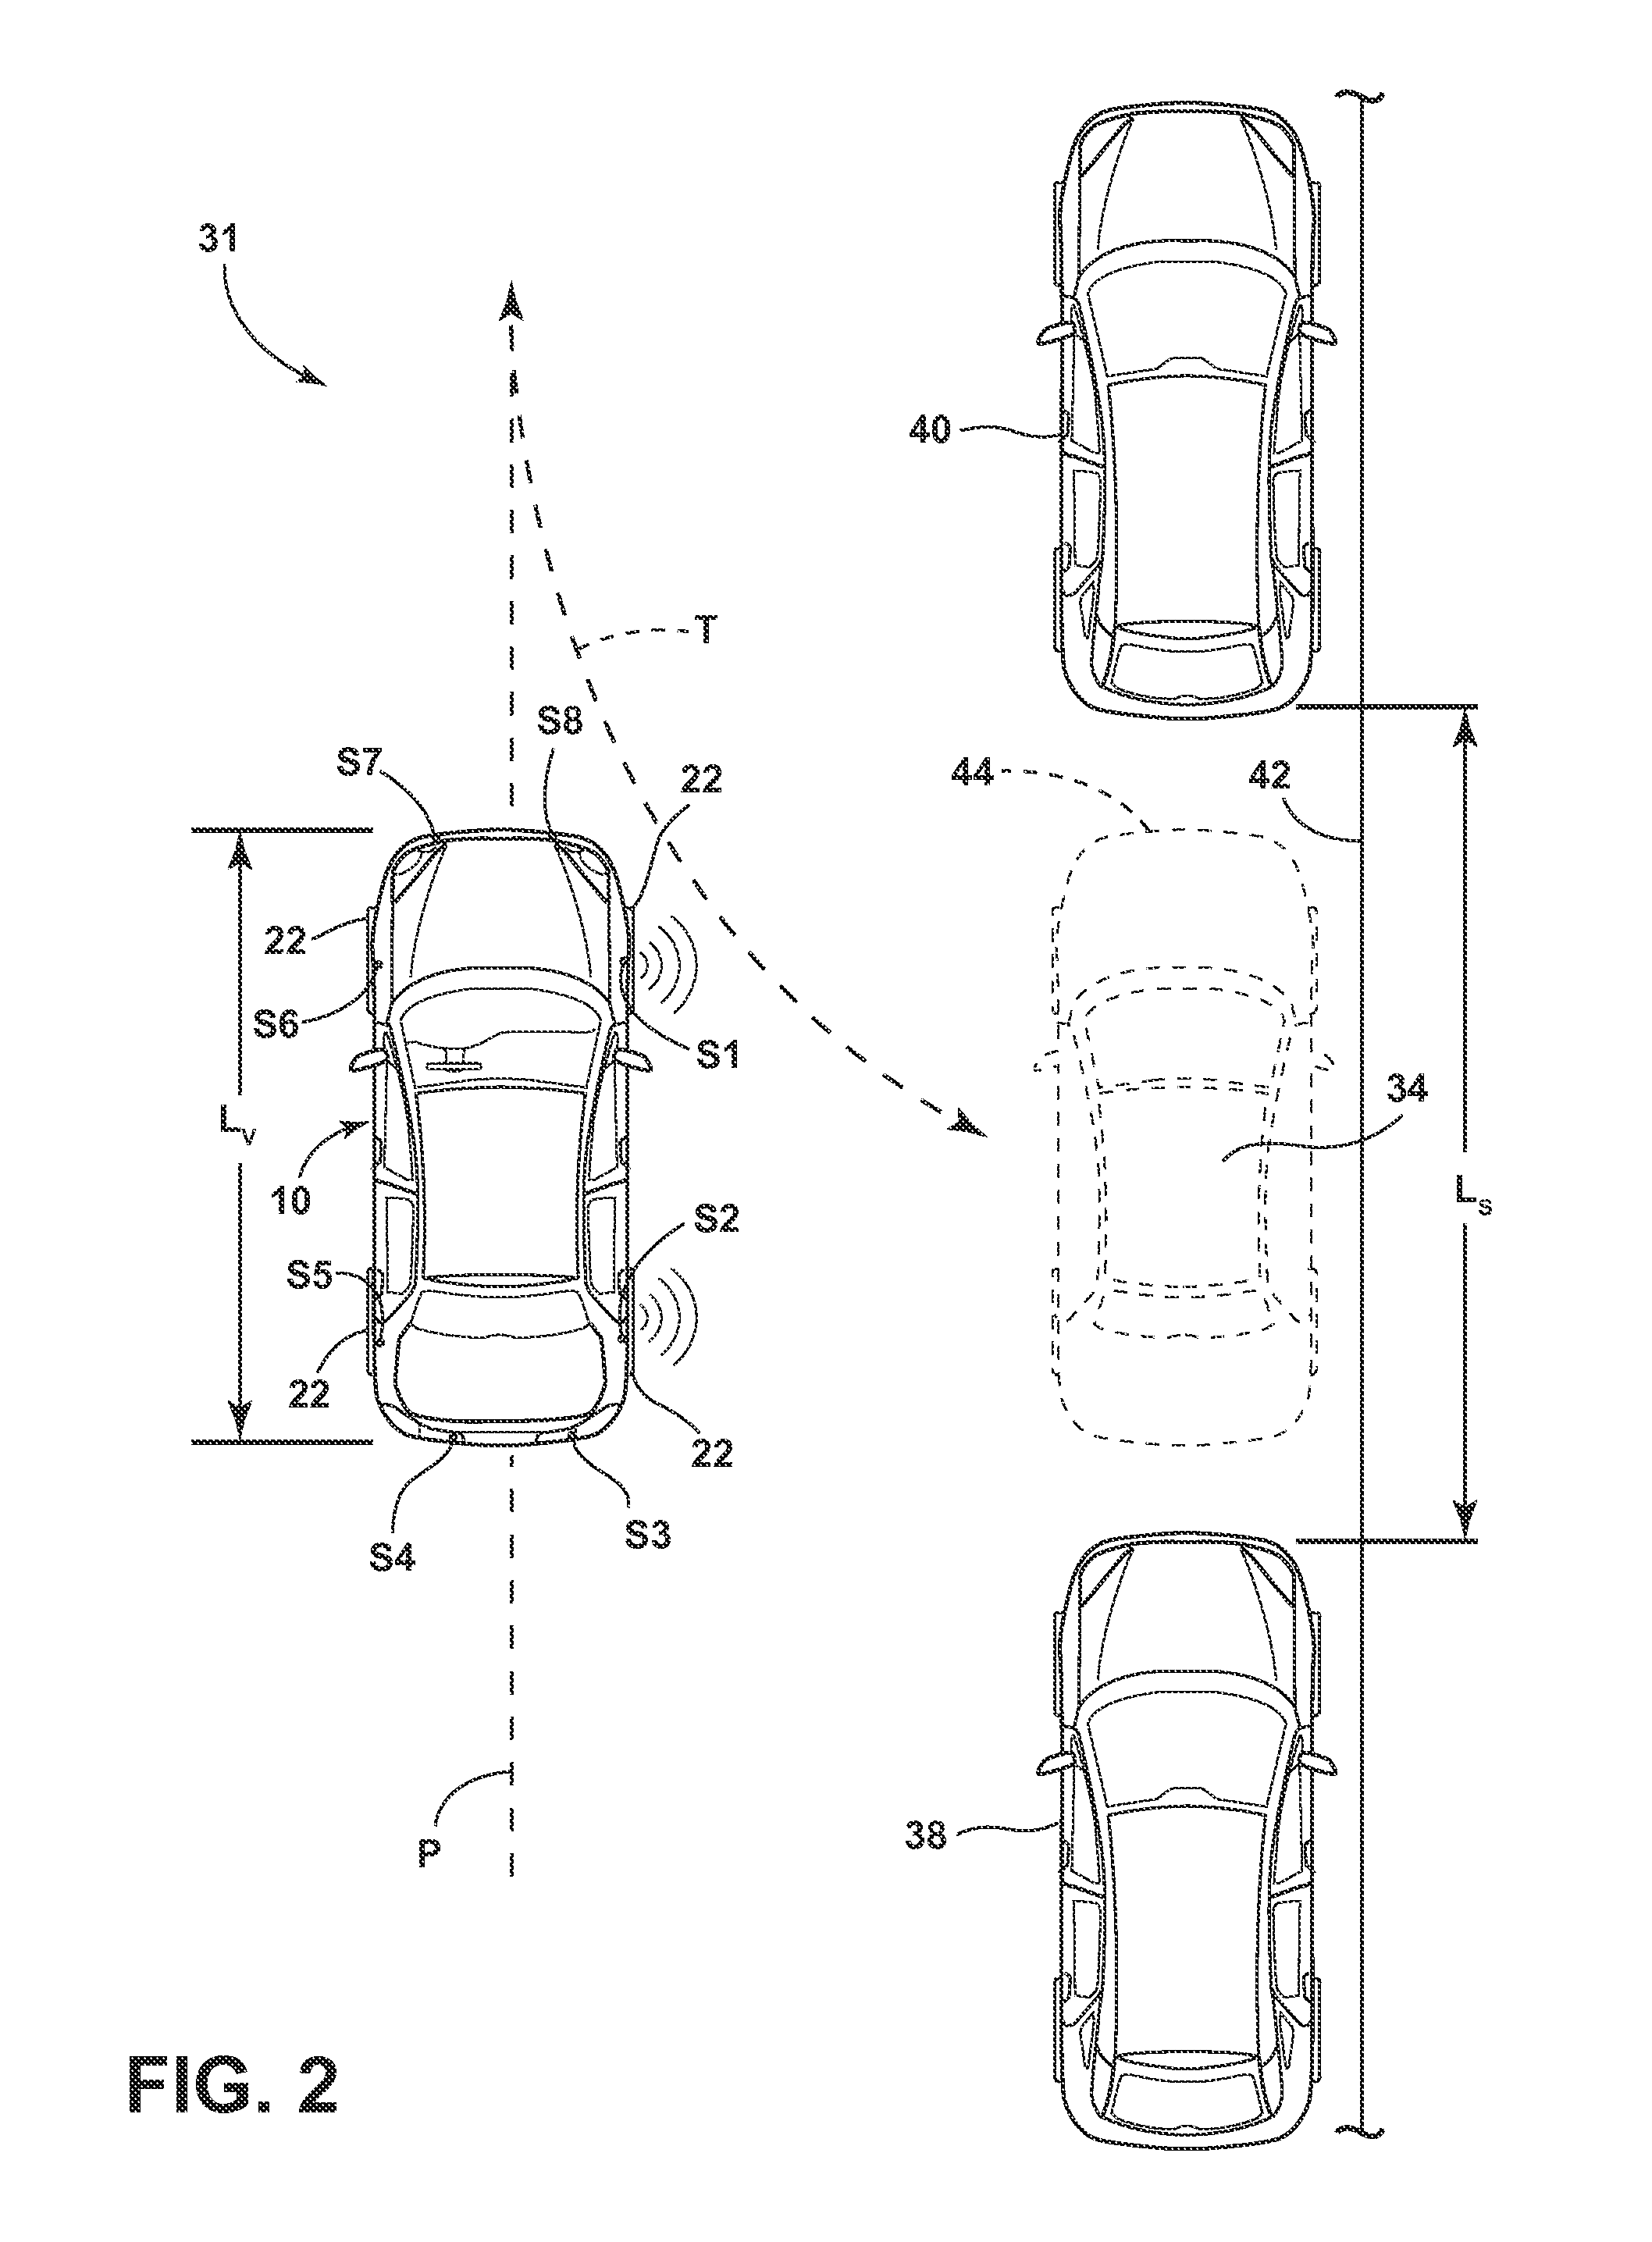 System and method for parallel parking a vehicle